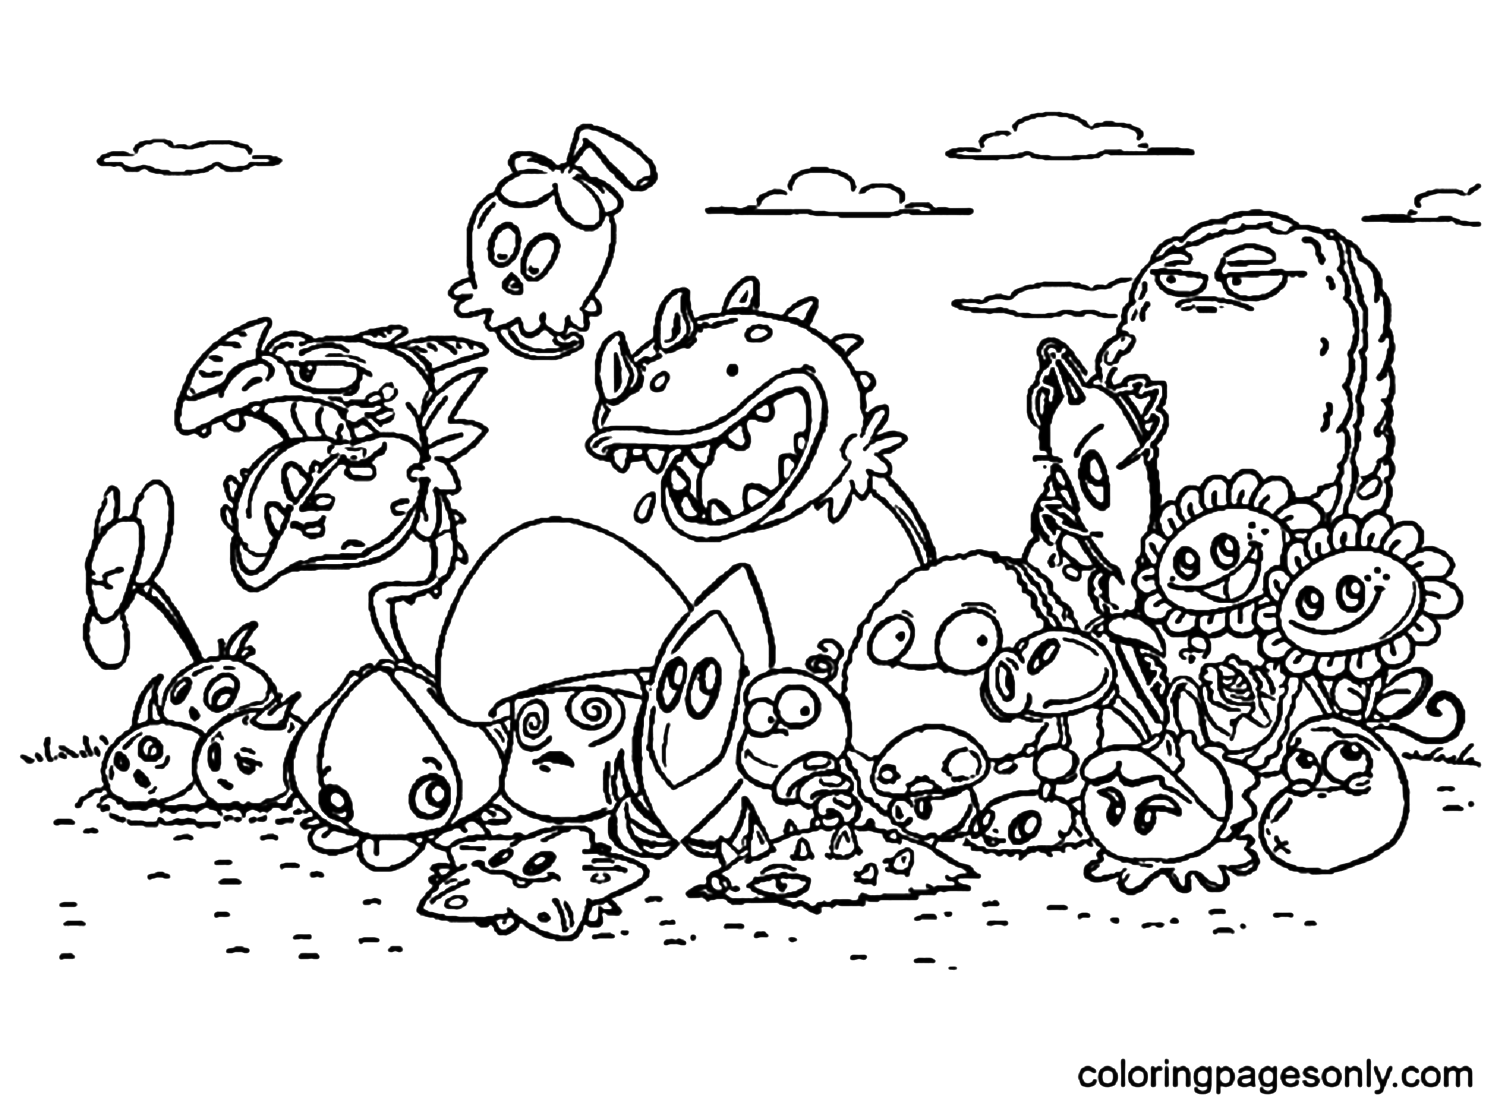 Plants Defend Themselves Against Zombies Coloring Pages